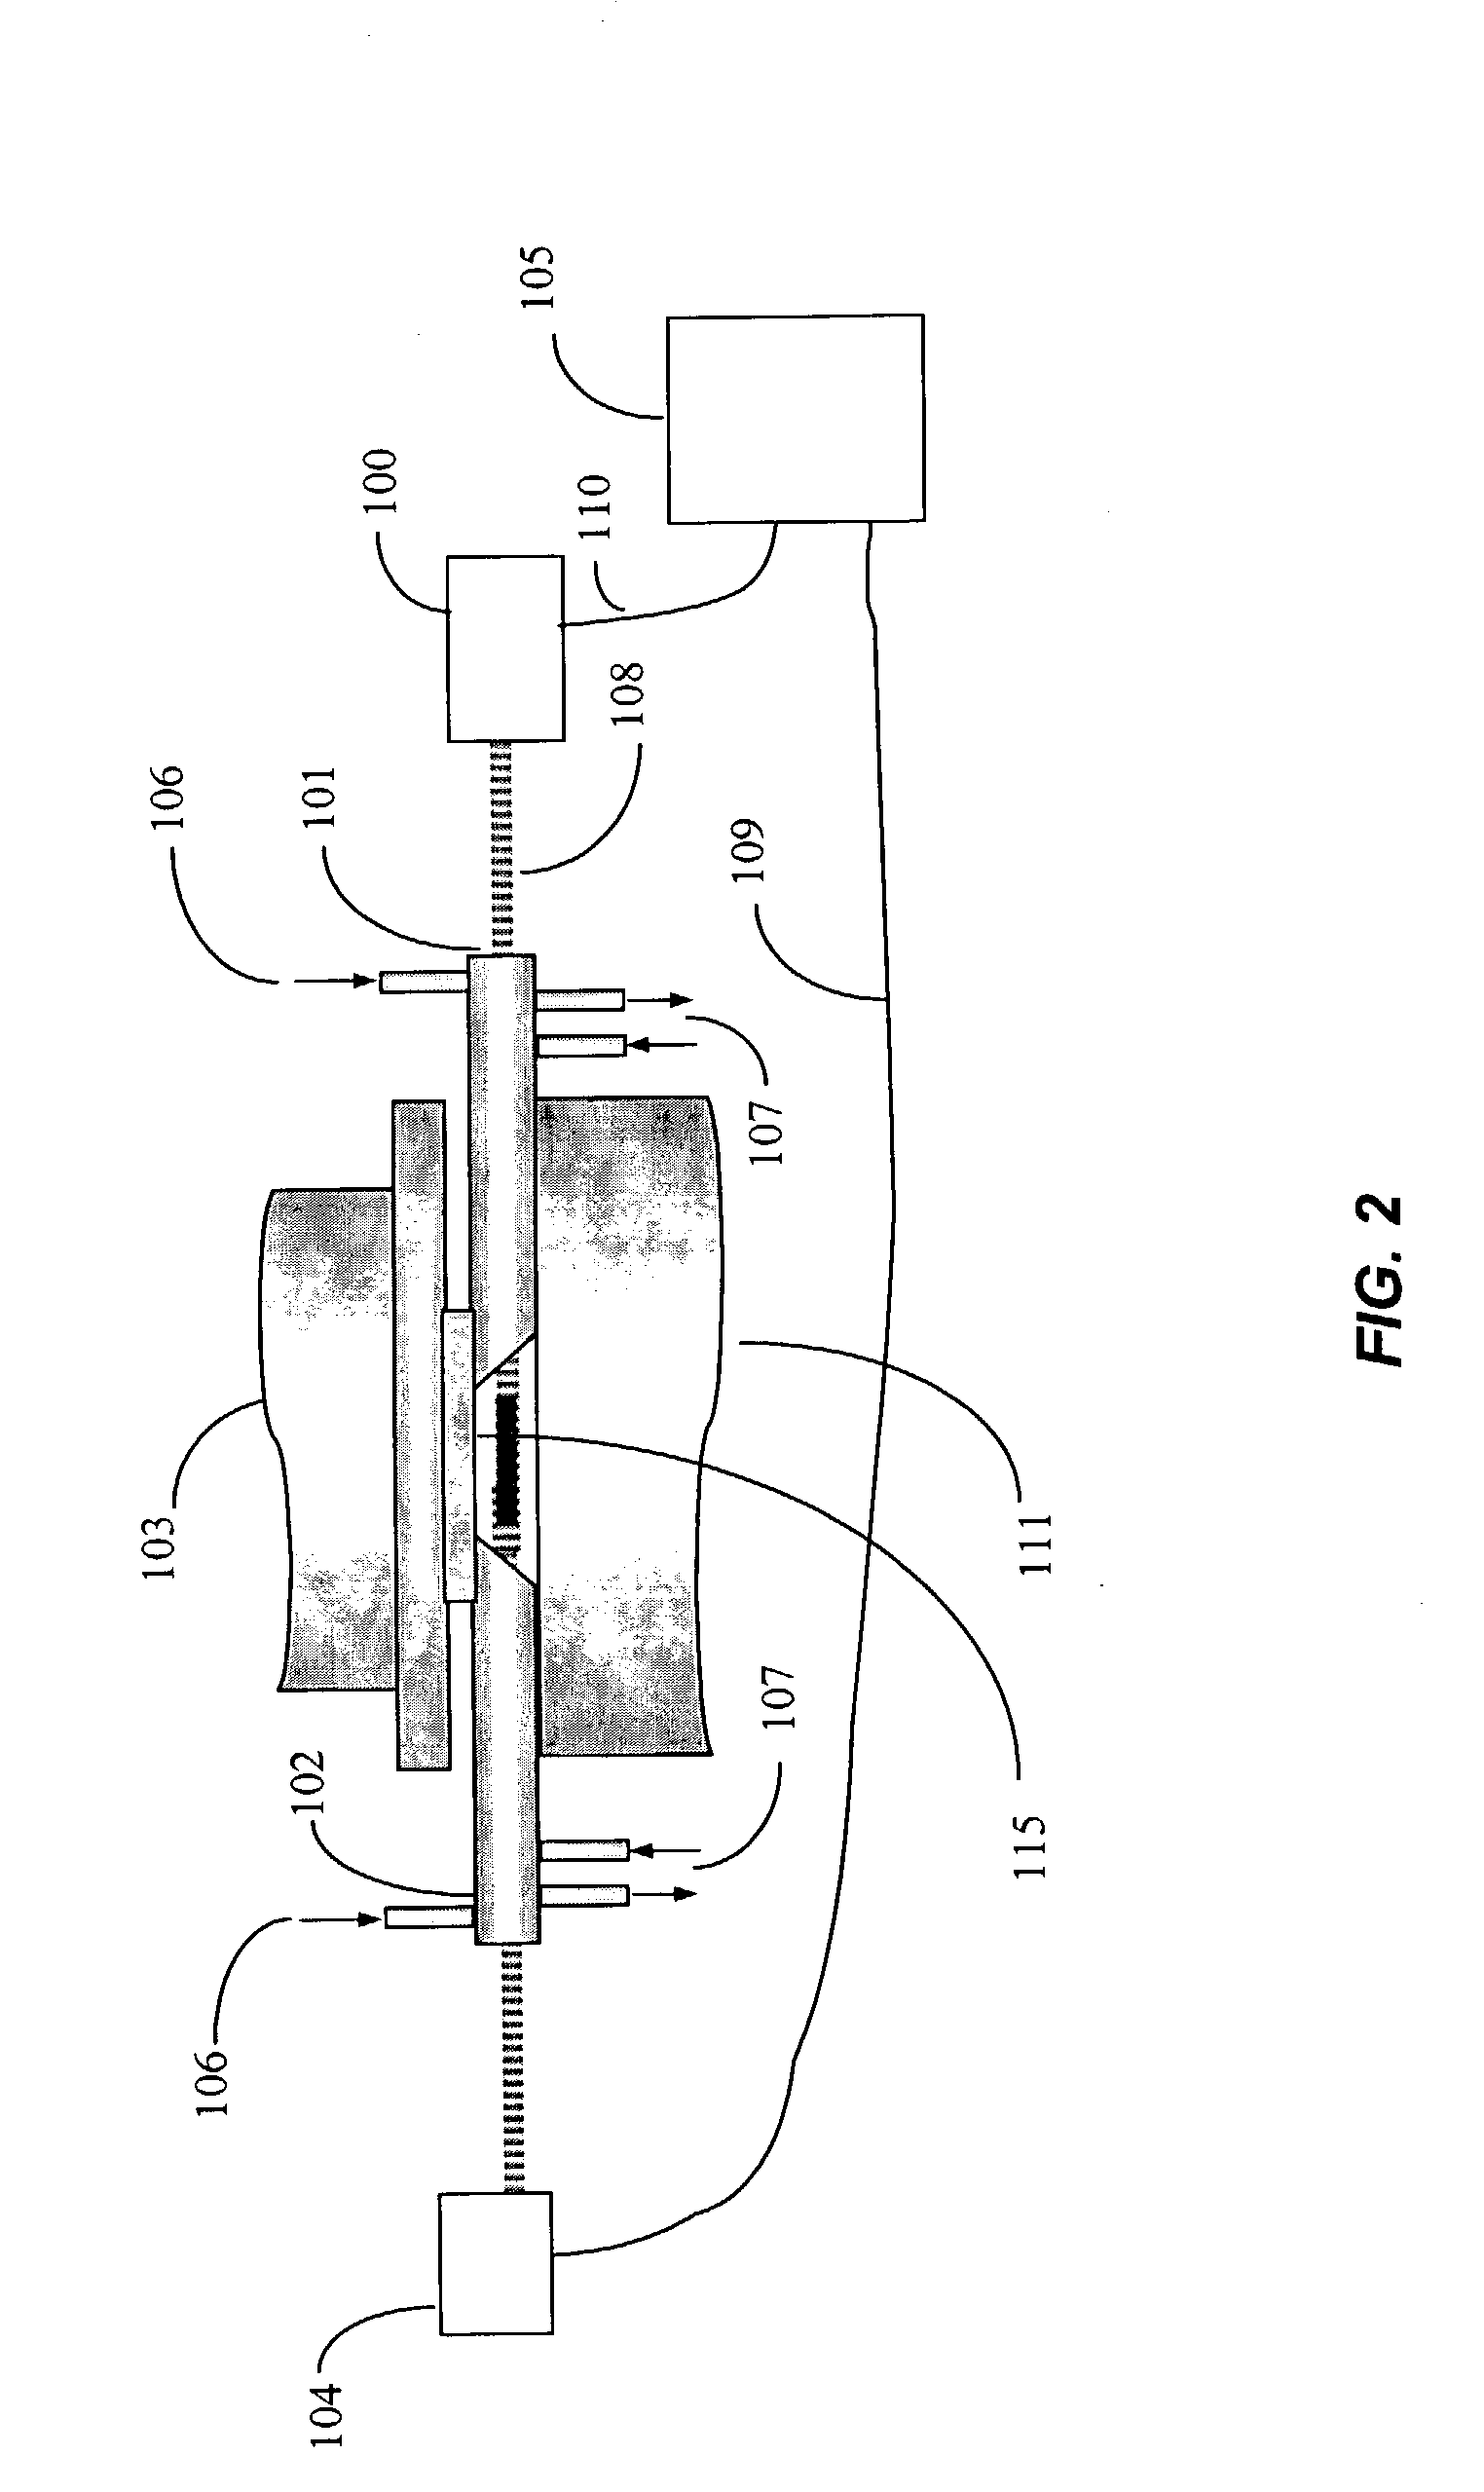 Method for enhanced gas monitoring in high particle density flow streams